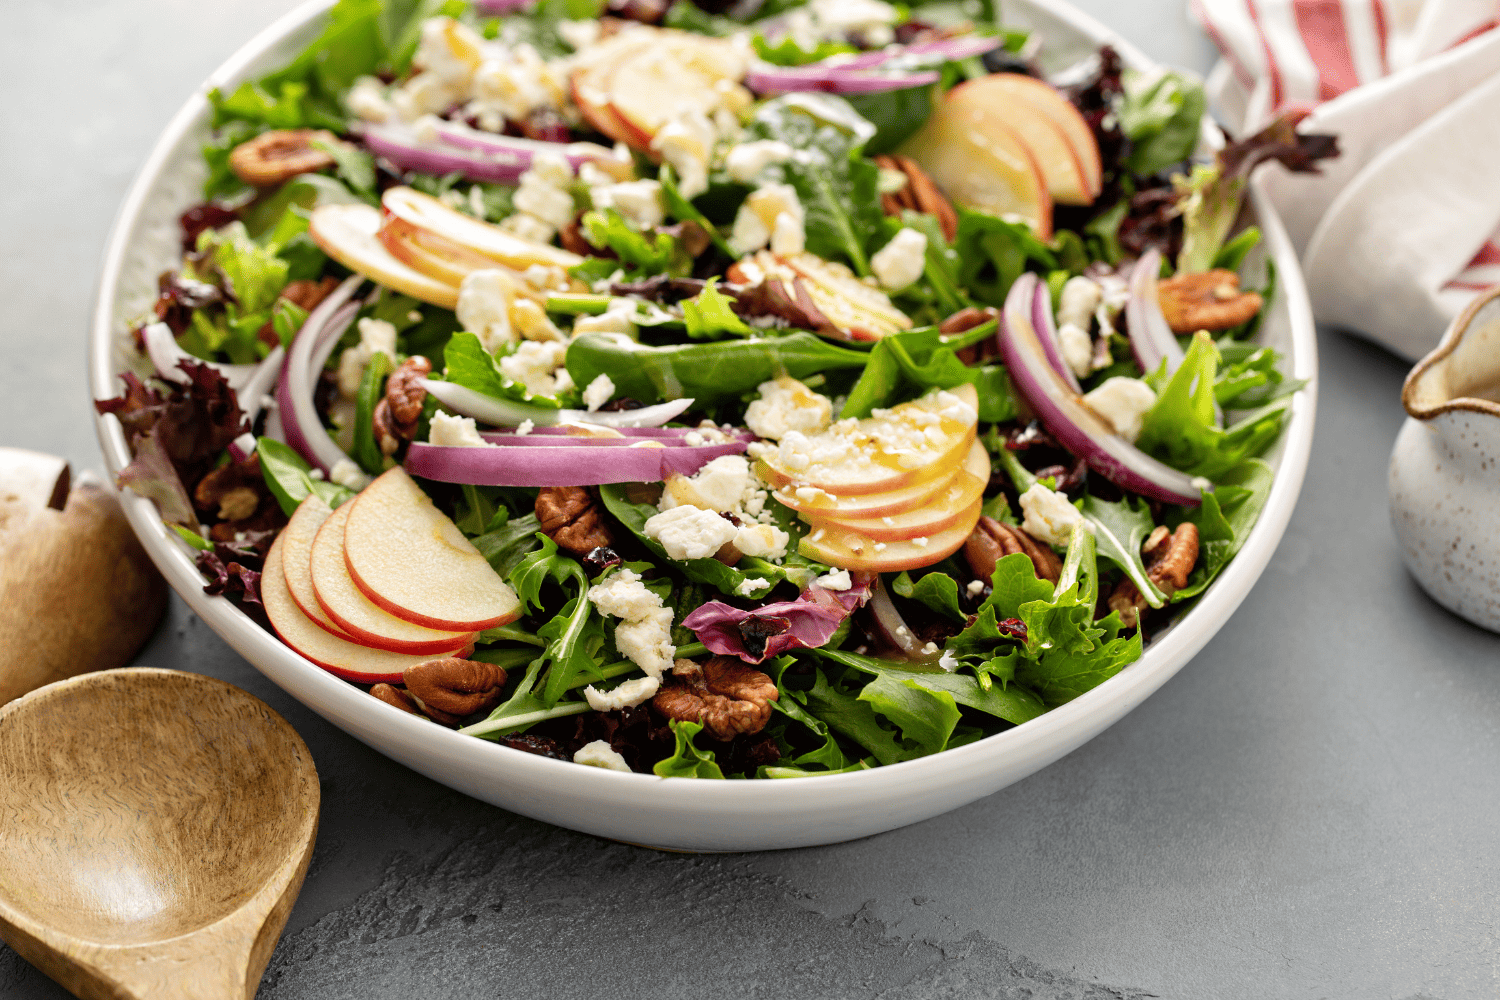 Winter salad with goat cheese, apples and pecans